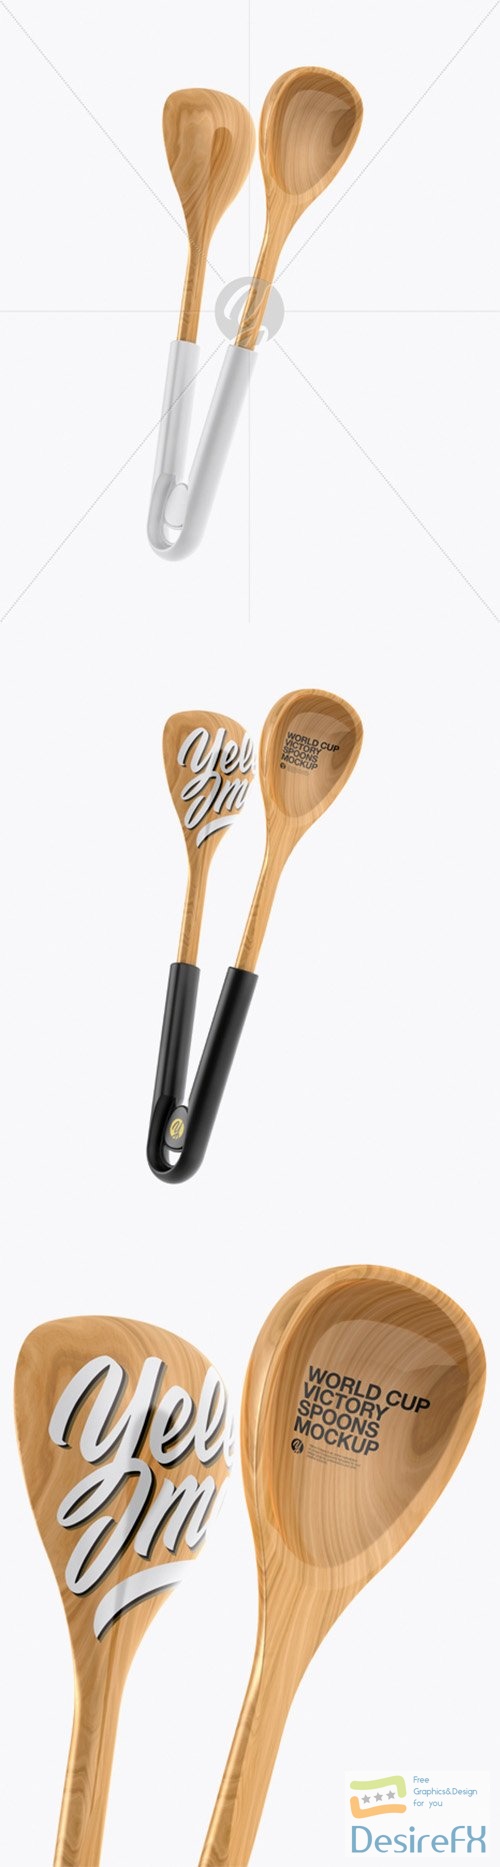 Wooden World Cup Victory Spoons Mockup - Half Side View 25591 TIF